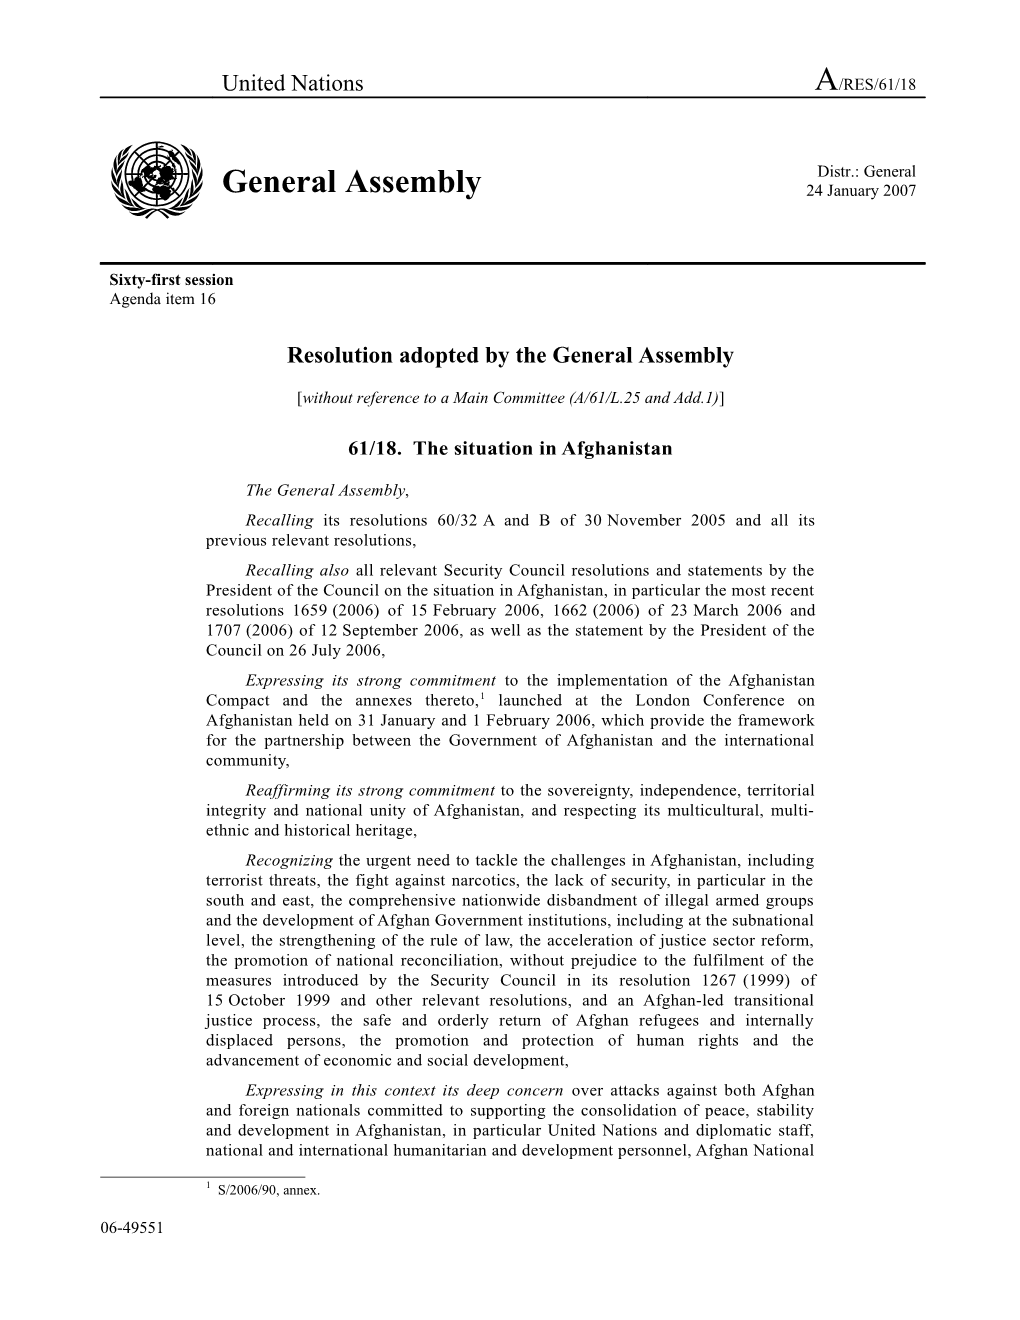 Resolution Adopted by the General Assembly s1